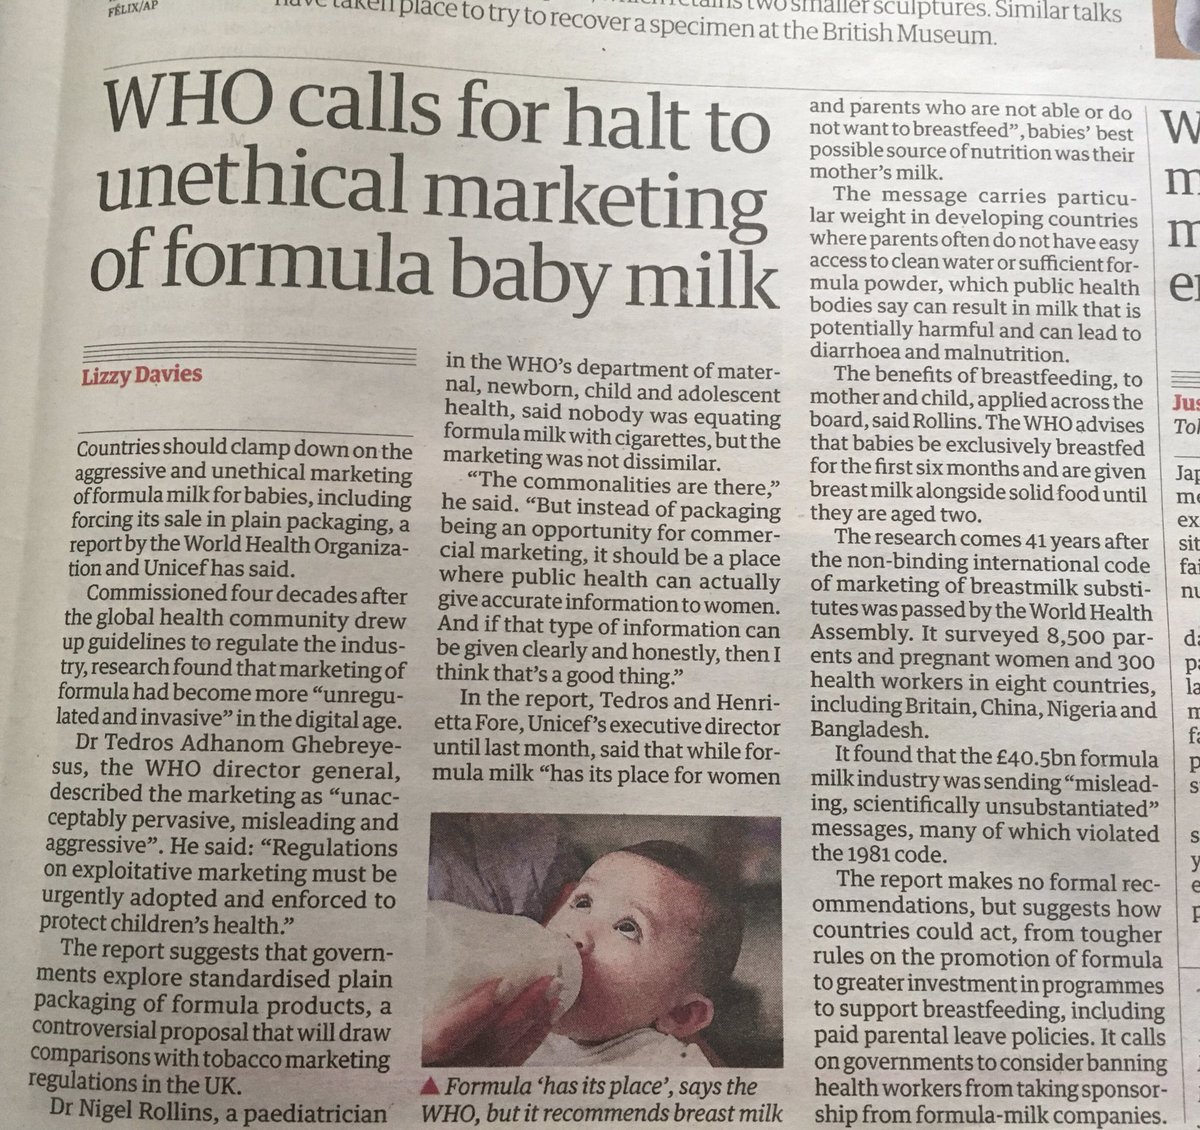 What the heck? Women have been campaigning about #BabyMilkFormula for over half a century now! WHO code was passed in 1981!?! Some of us have been boycotting nestle ever since for ignoring it. Capitalism is Evil. #SayNoToNestle #ZeroToleranceOfKitKat